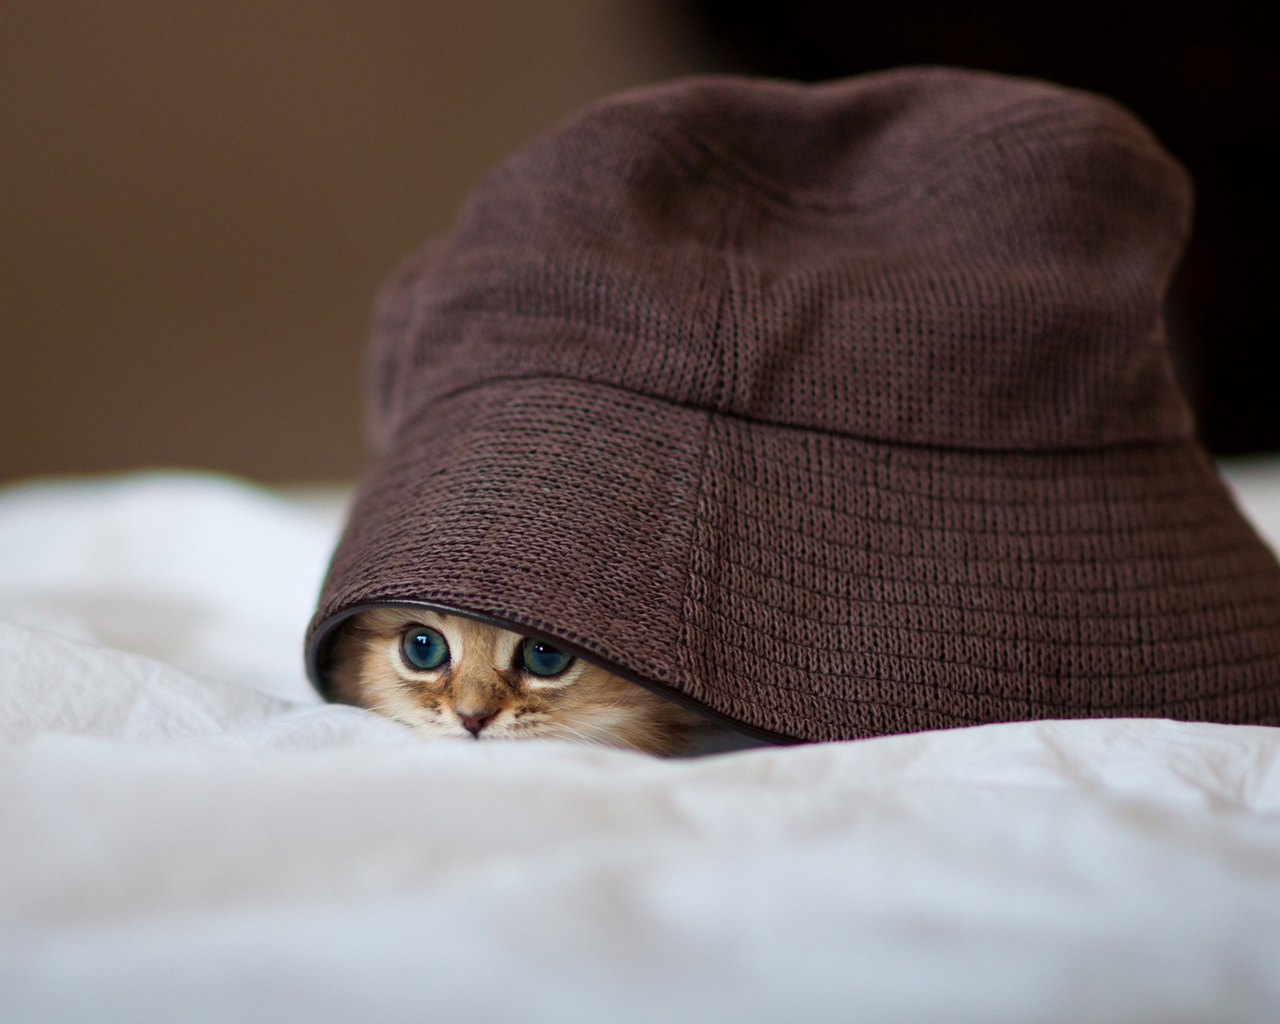 Little Kitty Hiding for 1280 x 1024 resolution